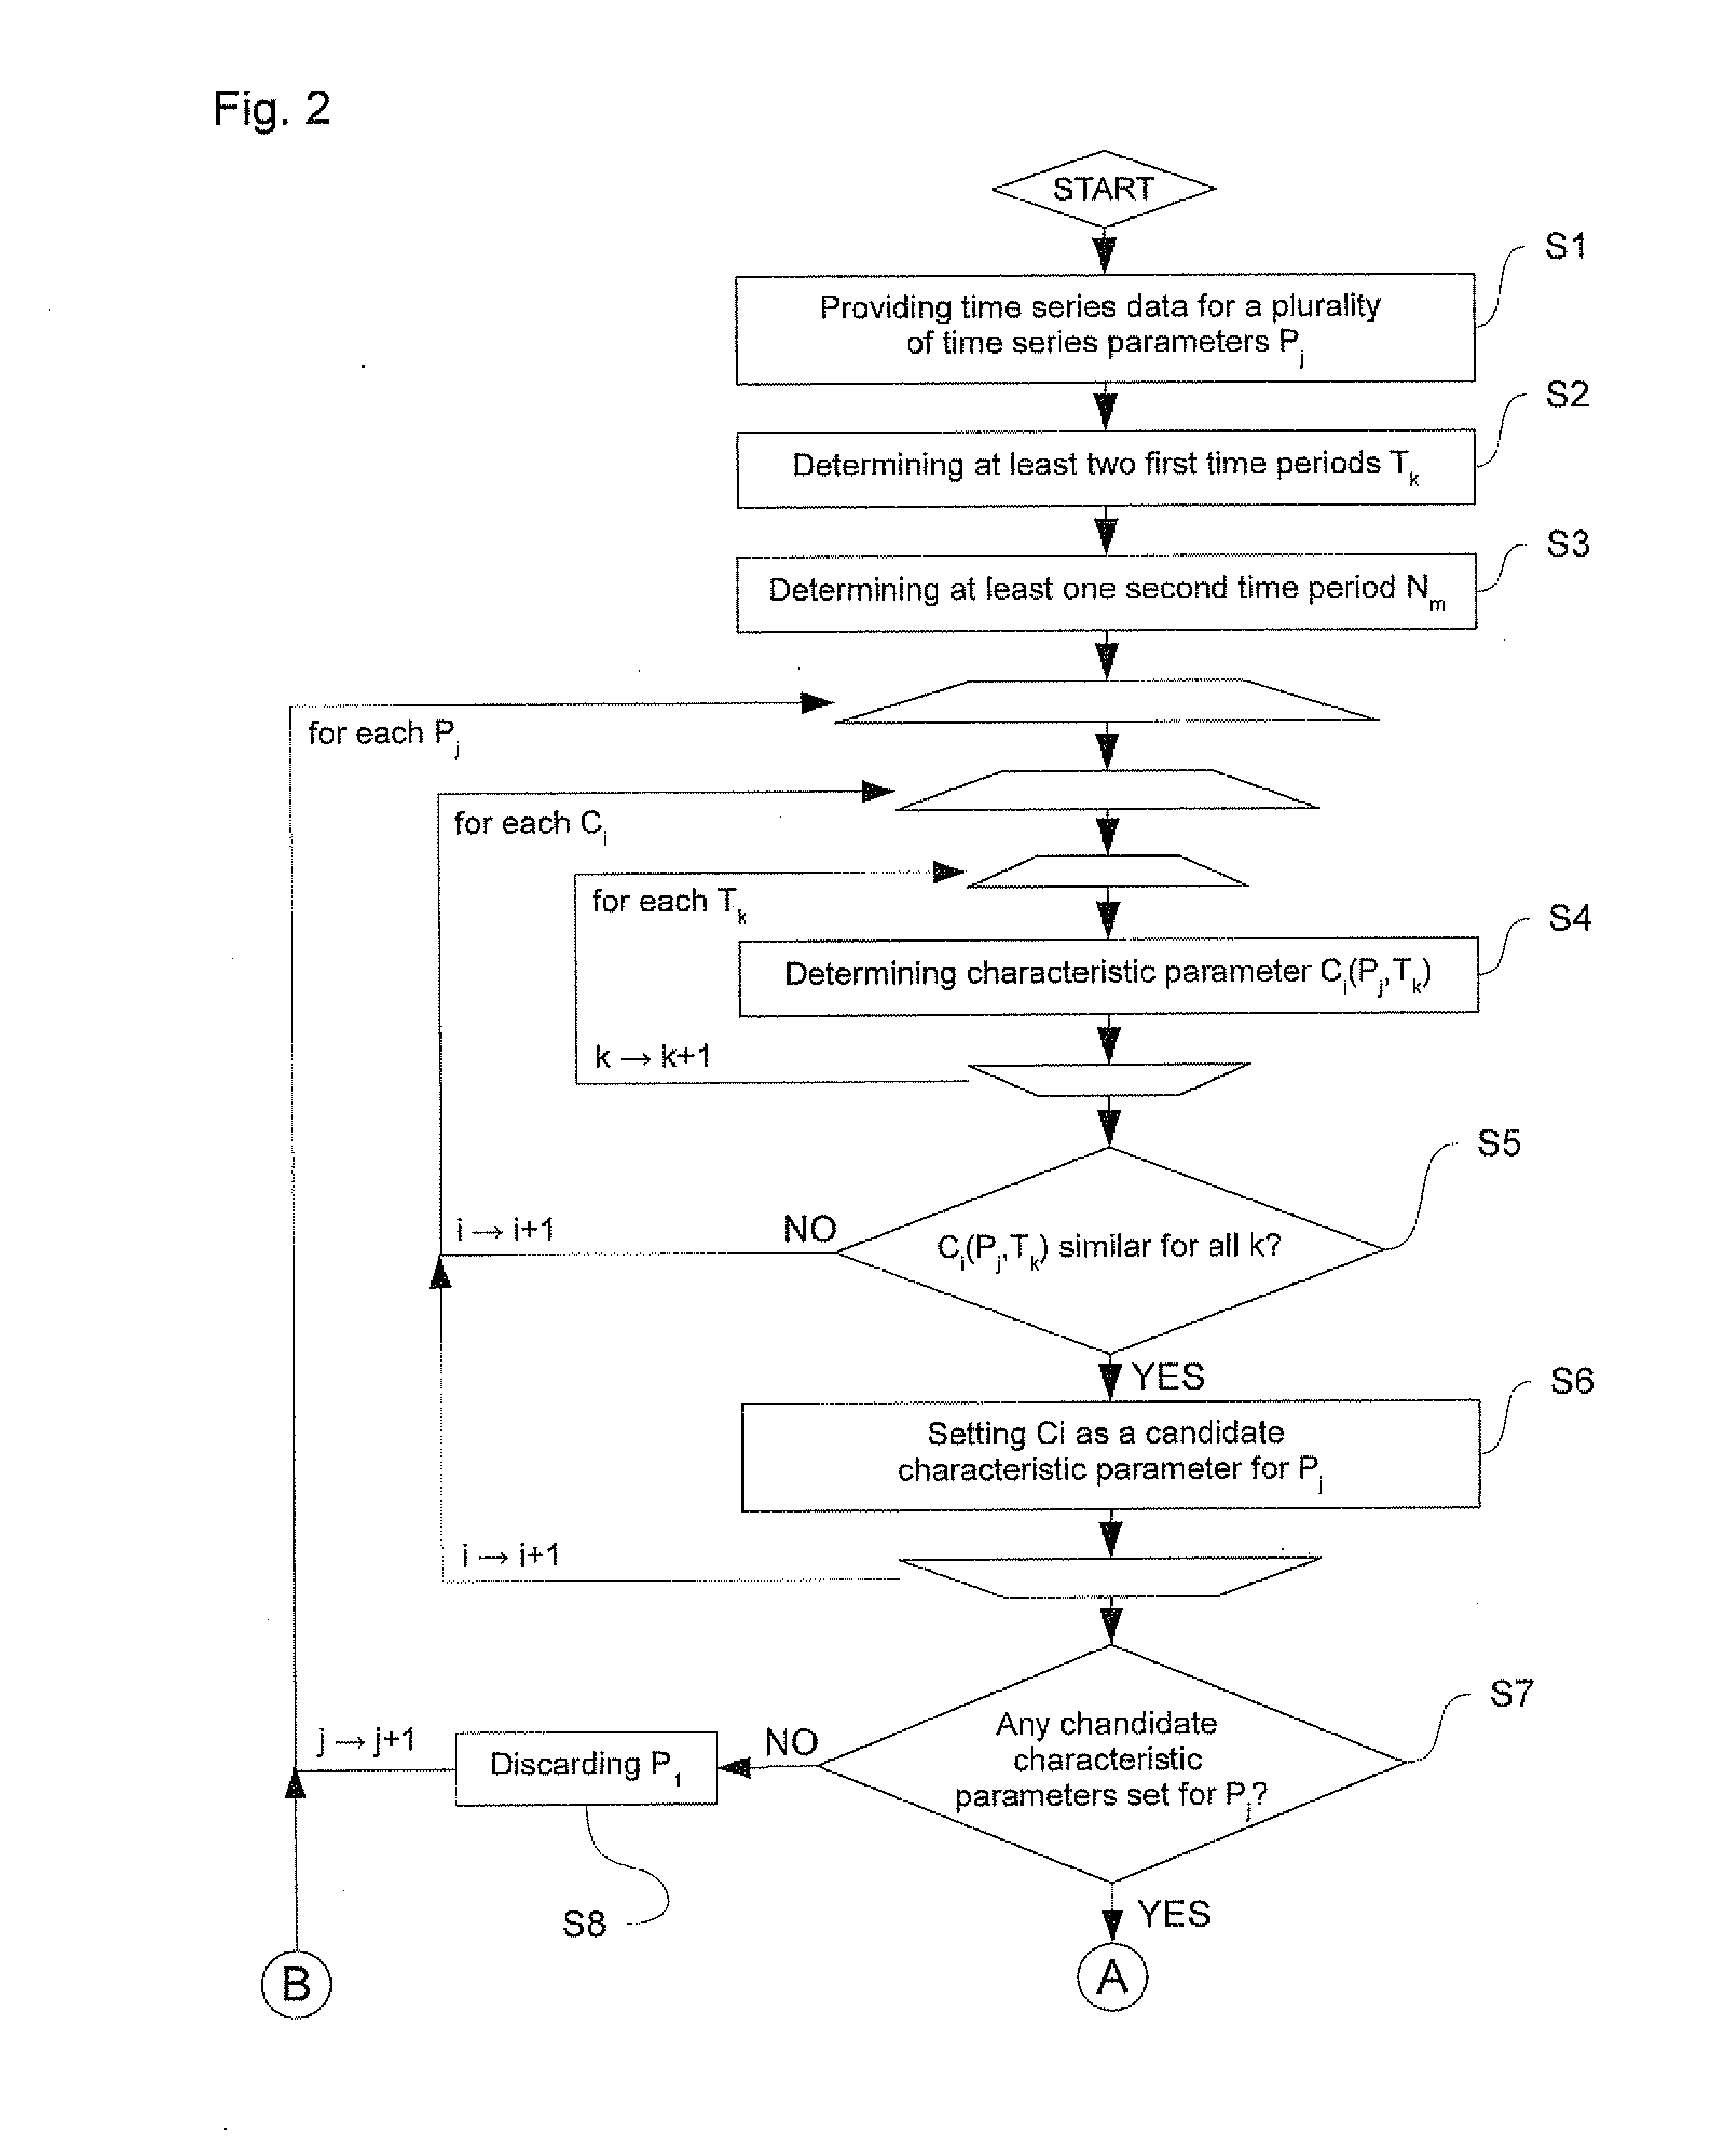 Method and apparatus for analyzing time series data